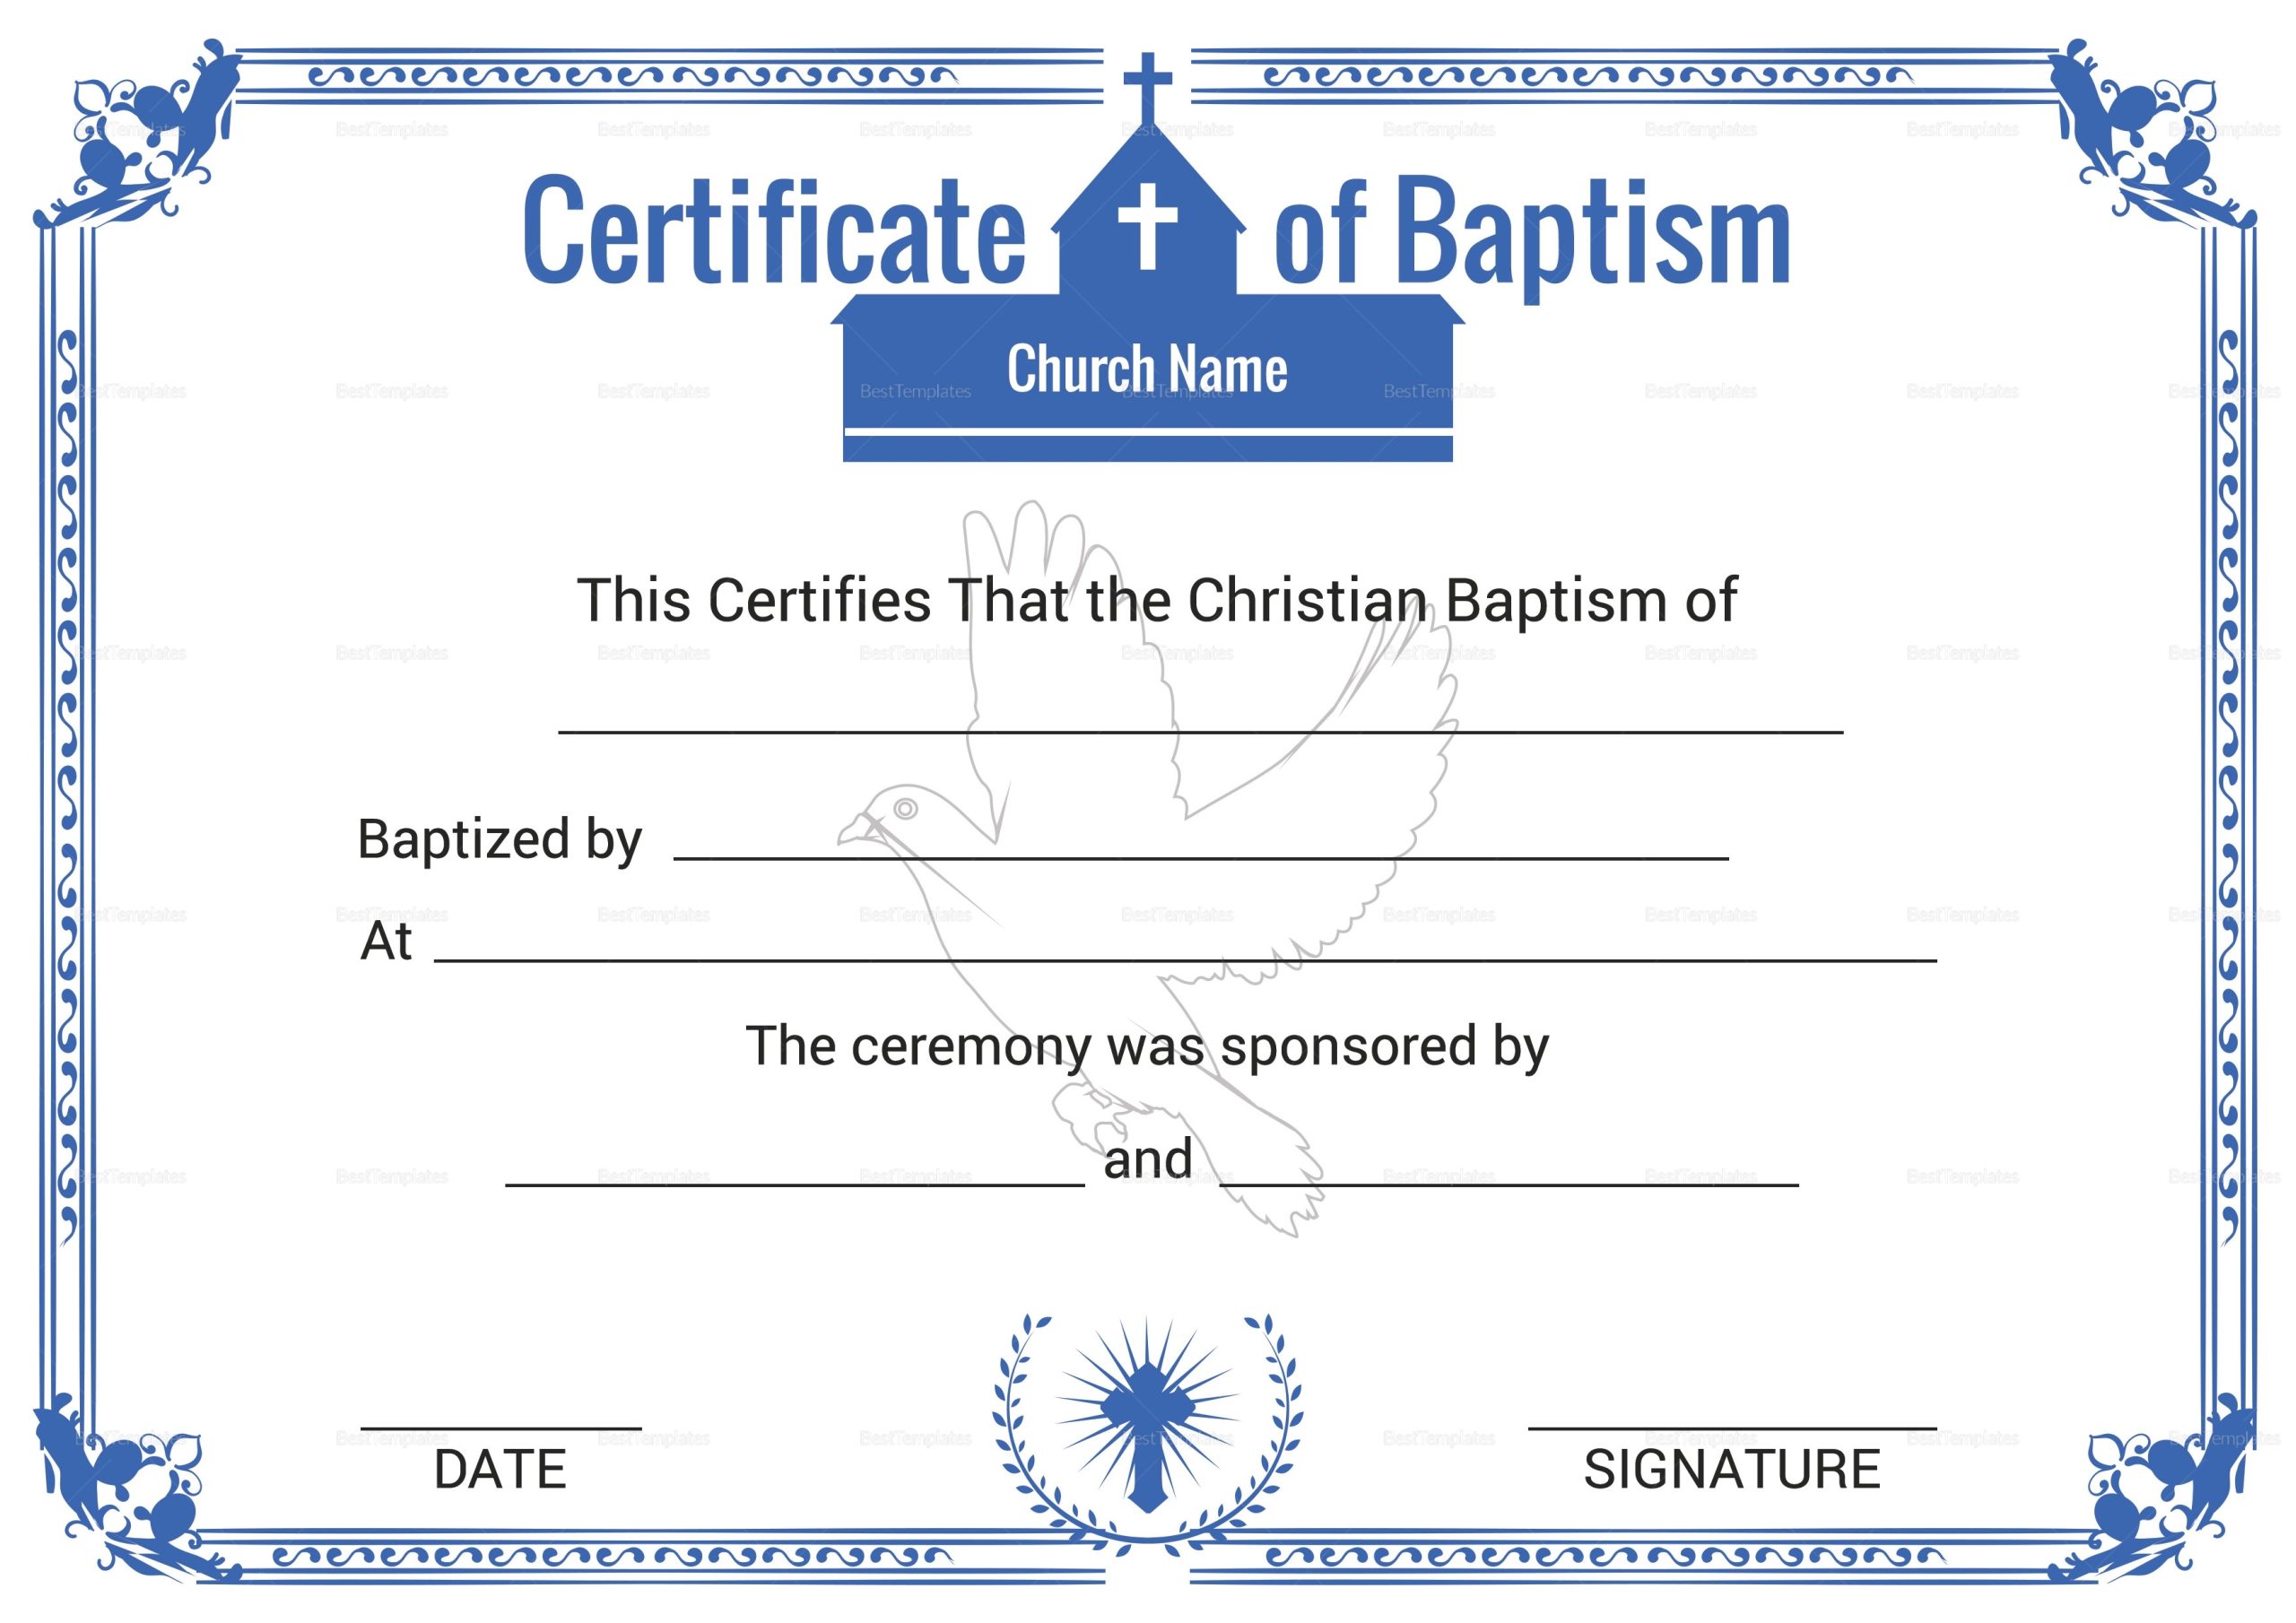 Christian Baptism Certificate Template In Adobe Photoshop, Microsoft Word With Certificate Templates For Word Free Downloads